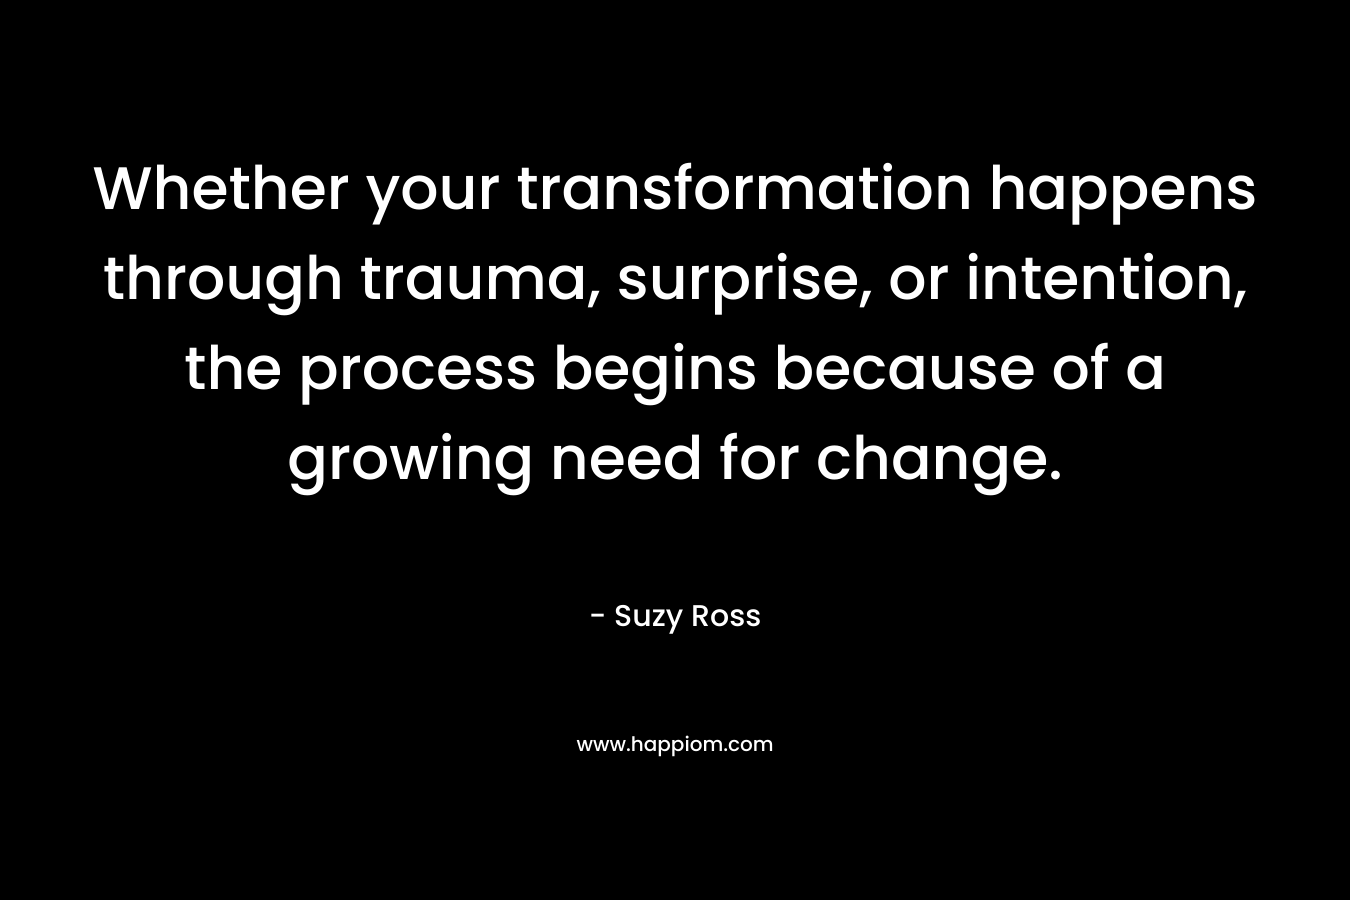 Whether your transformation happens through trauma, surprise, or intention, the process begins because of a growing need for change. – Suzy Ross